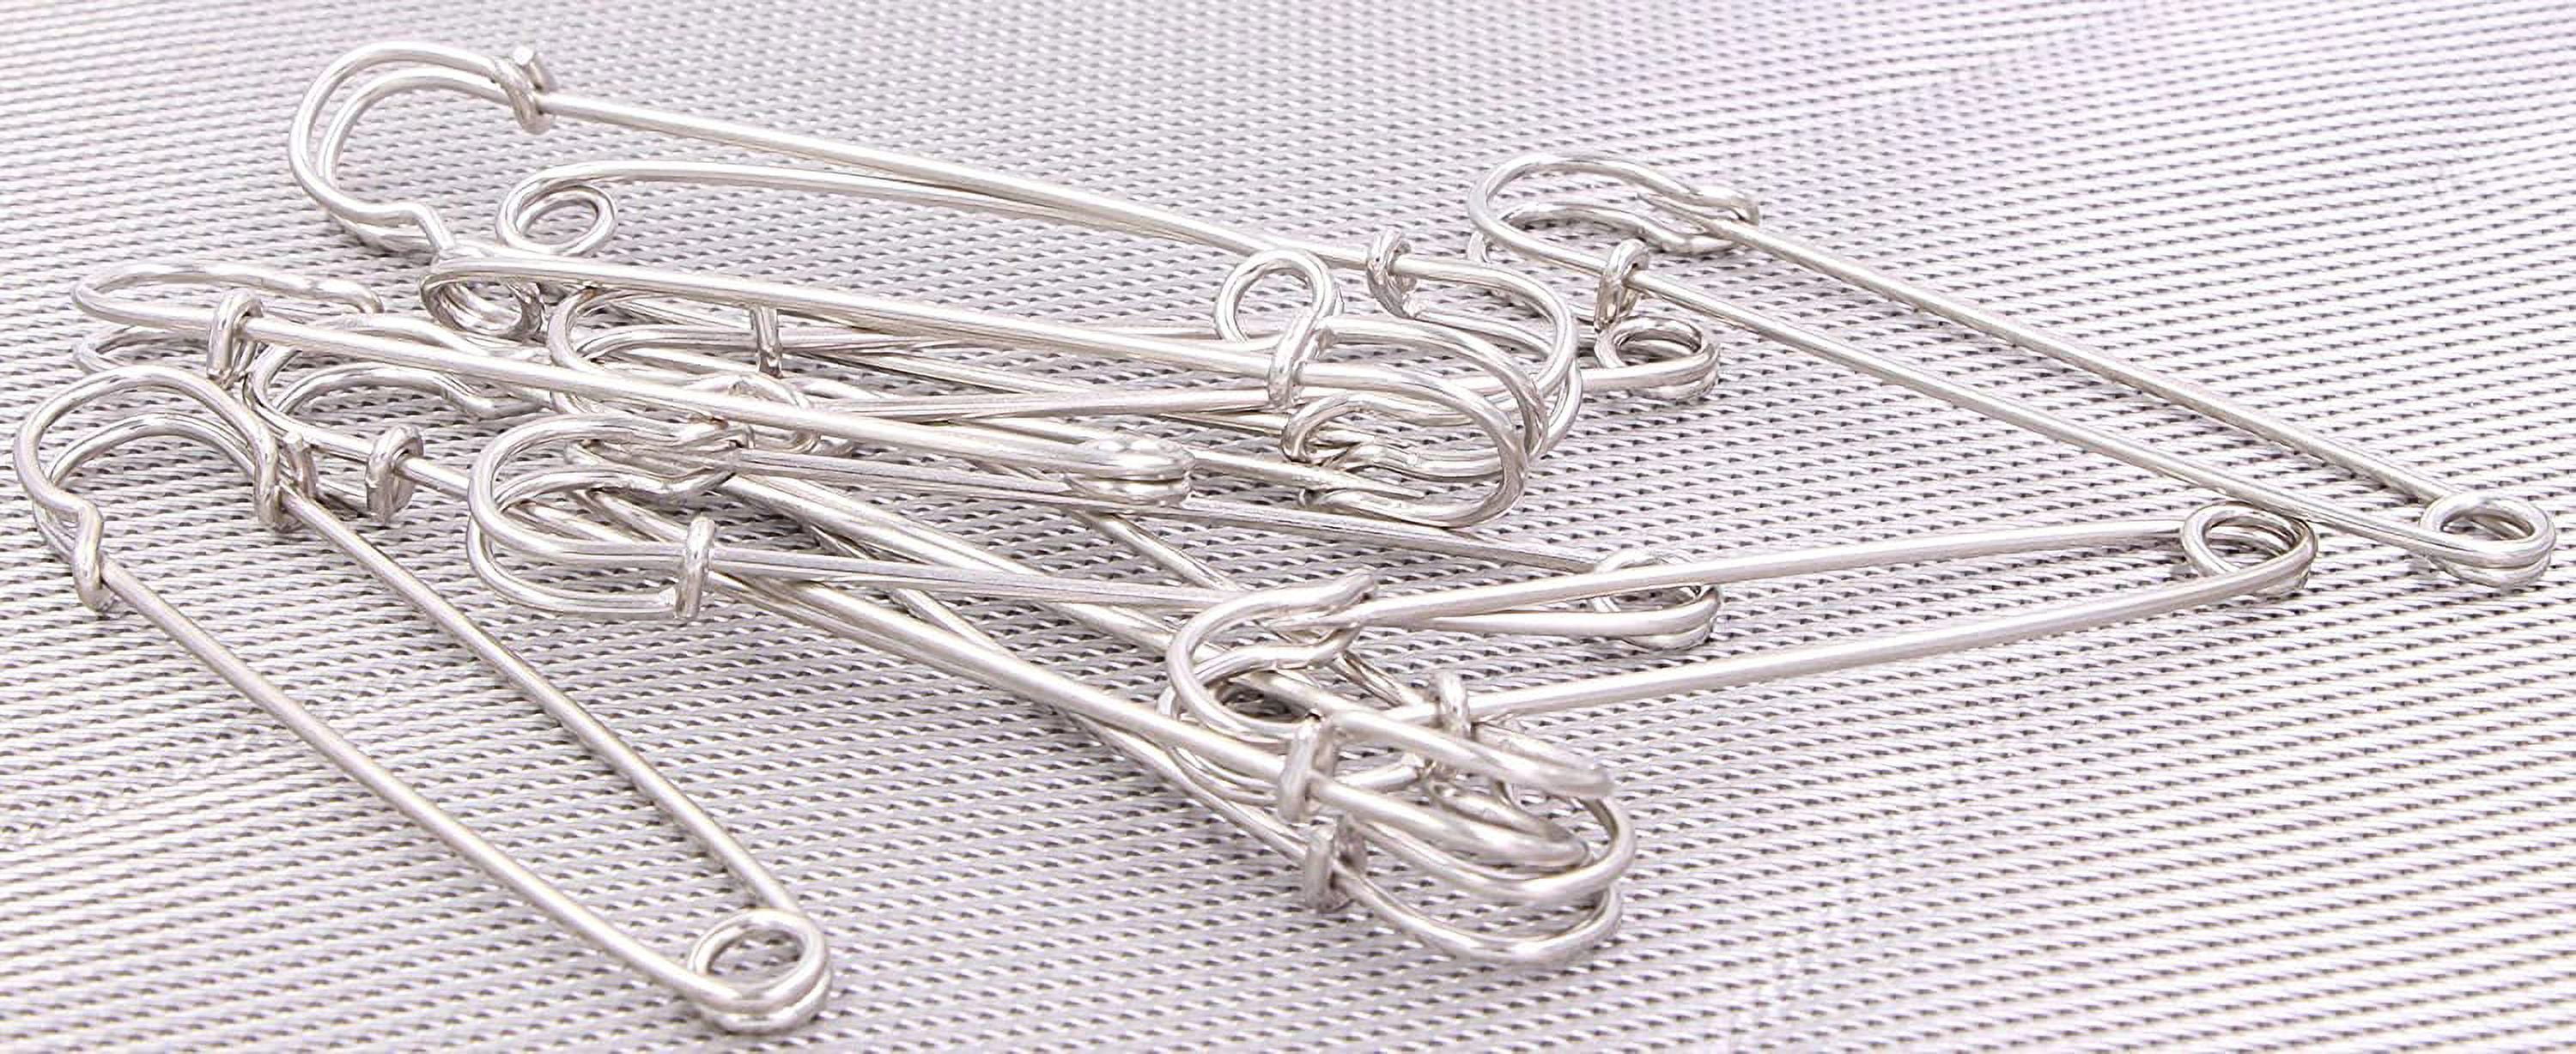 Kilt Pins  Large Safety Pins 4inch (10 Pack) Heavy Duty Blanket Pins -  Beads And Beading Supplies from The Bead Shop Ltd UK